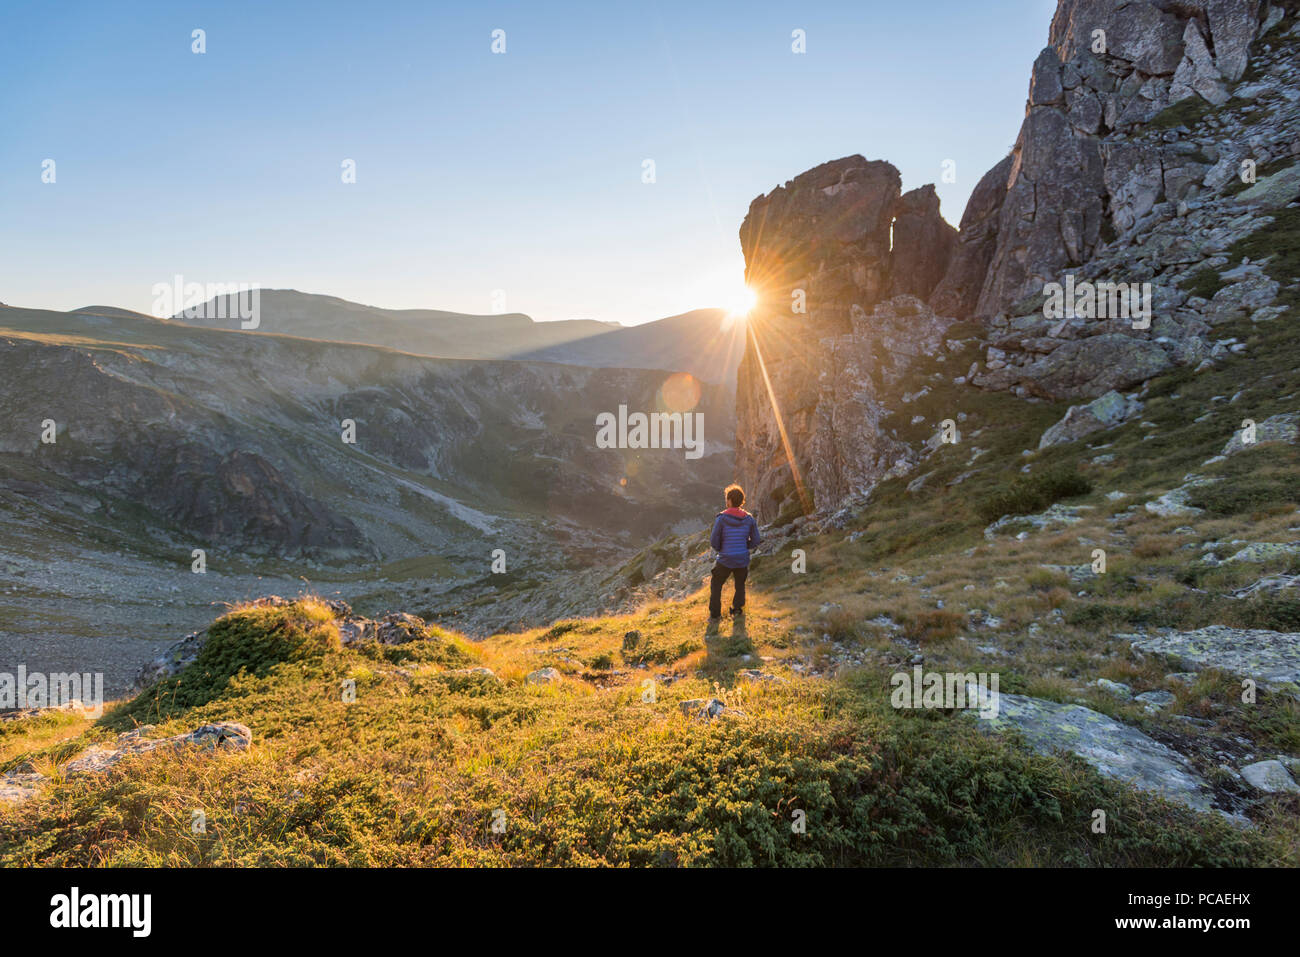 The last rays of sun disappear behind a rock face after a day of trekking in the Rila Mountains, Bulgaria, Europe Stock Photo